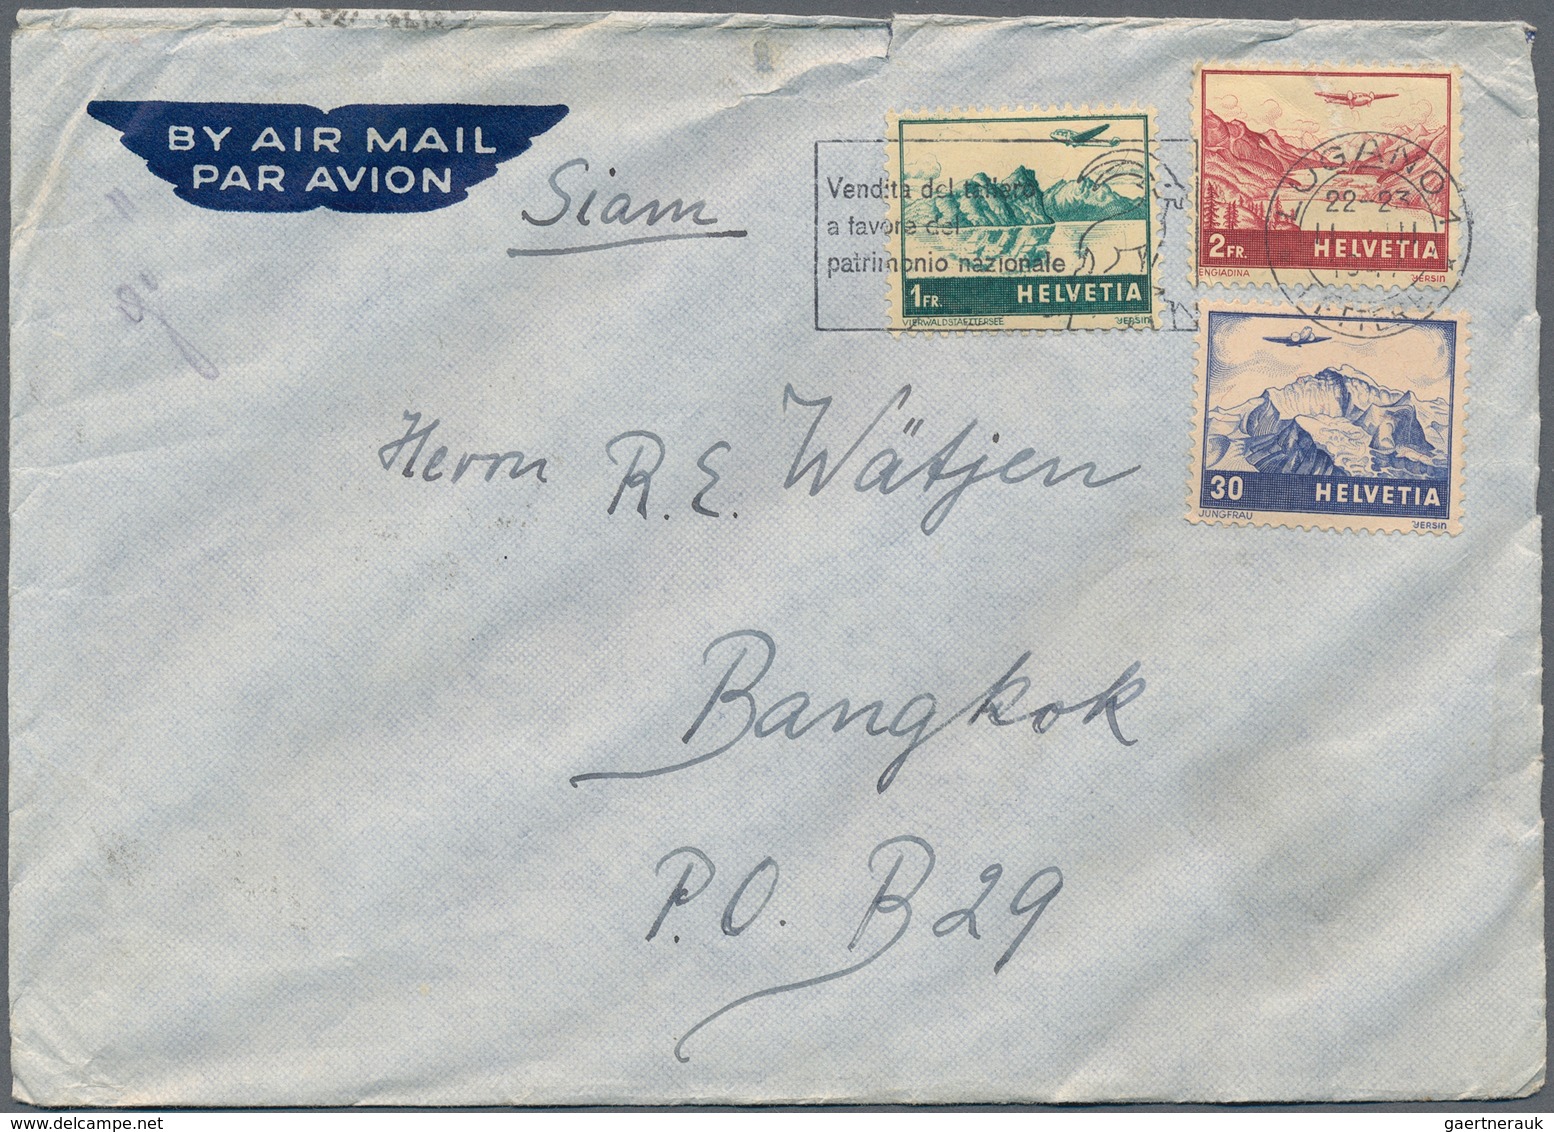 Thailand: 1946-47: Group Of Nine Airmail Covers From Switzerland To Thailand, Different Frankings, A - Thaïlande